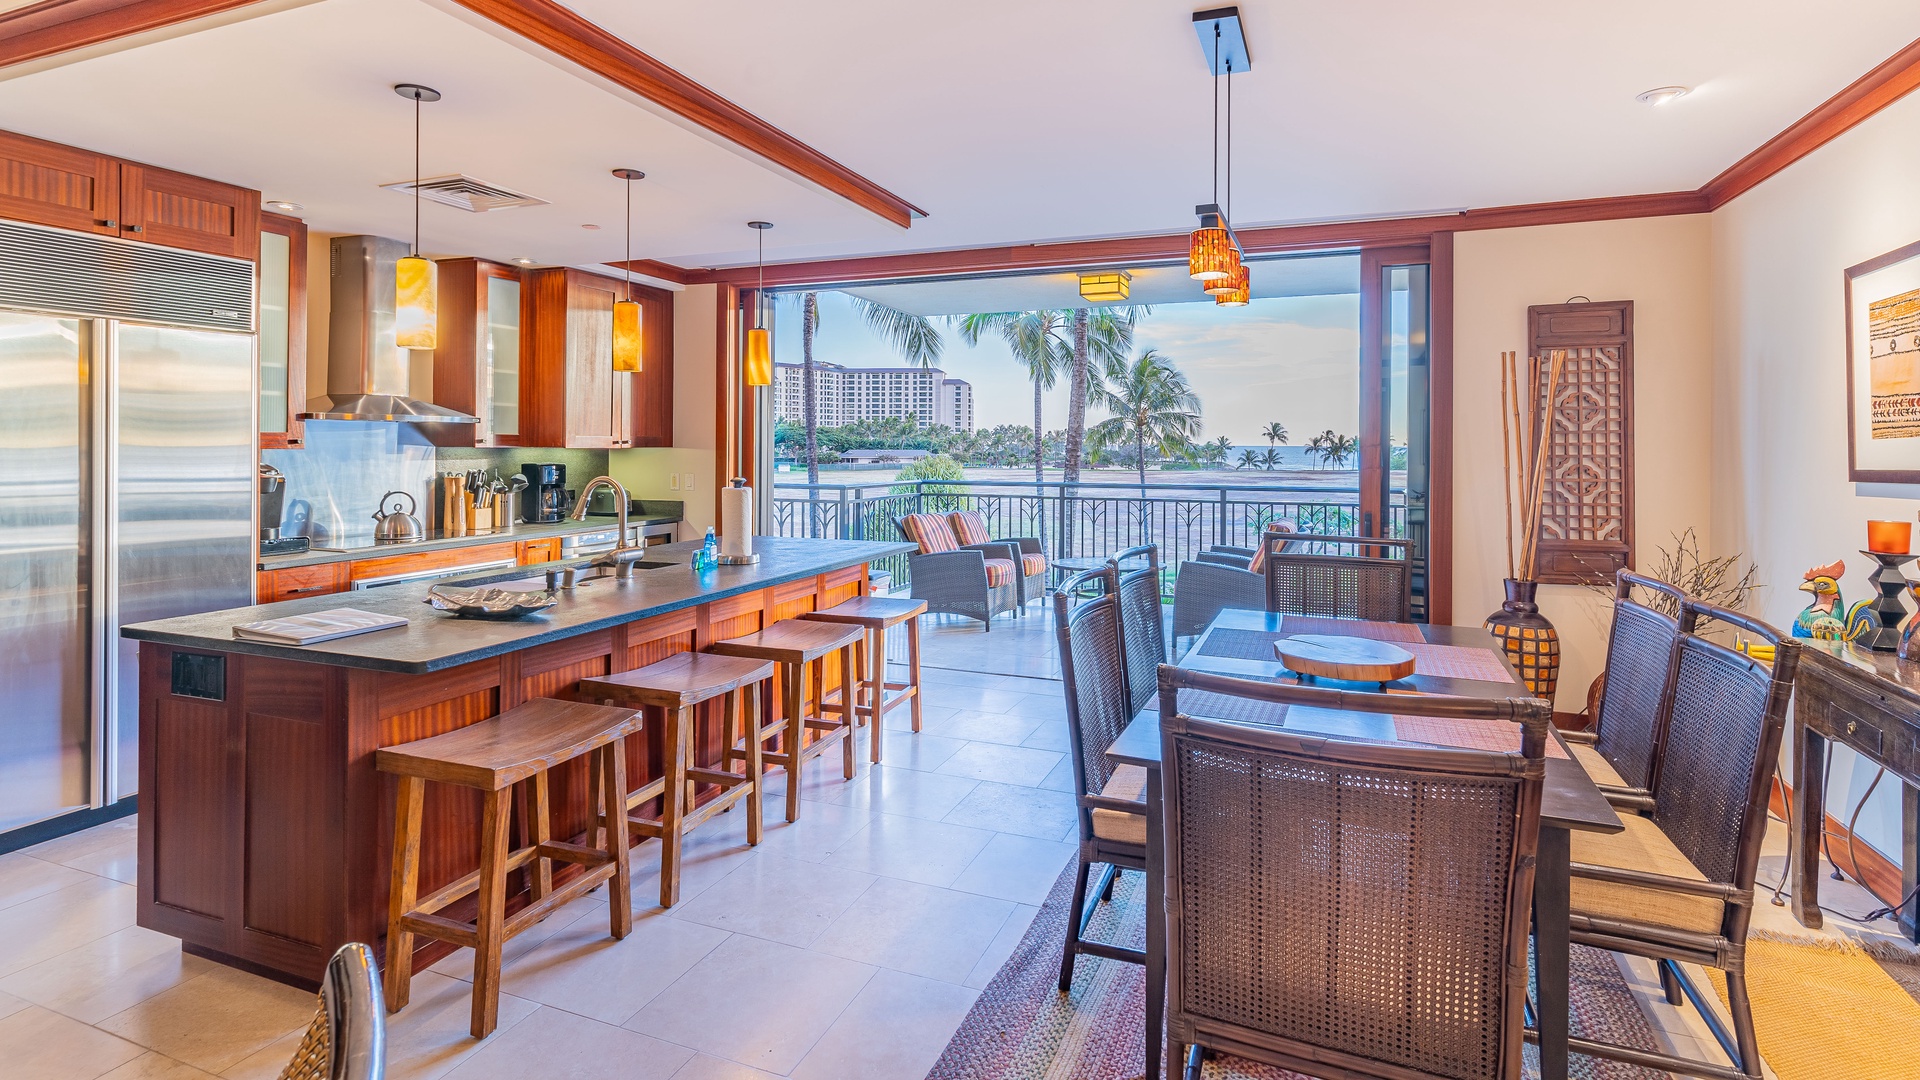 Kapolei Vacation Rentals, Ko Olina Beach Villas B301 - An open floor plan of the kitchen with bar seating and the dining area.